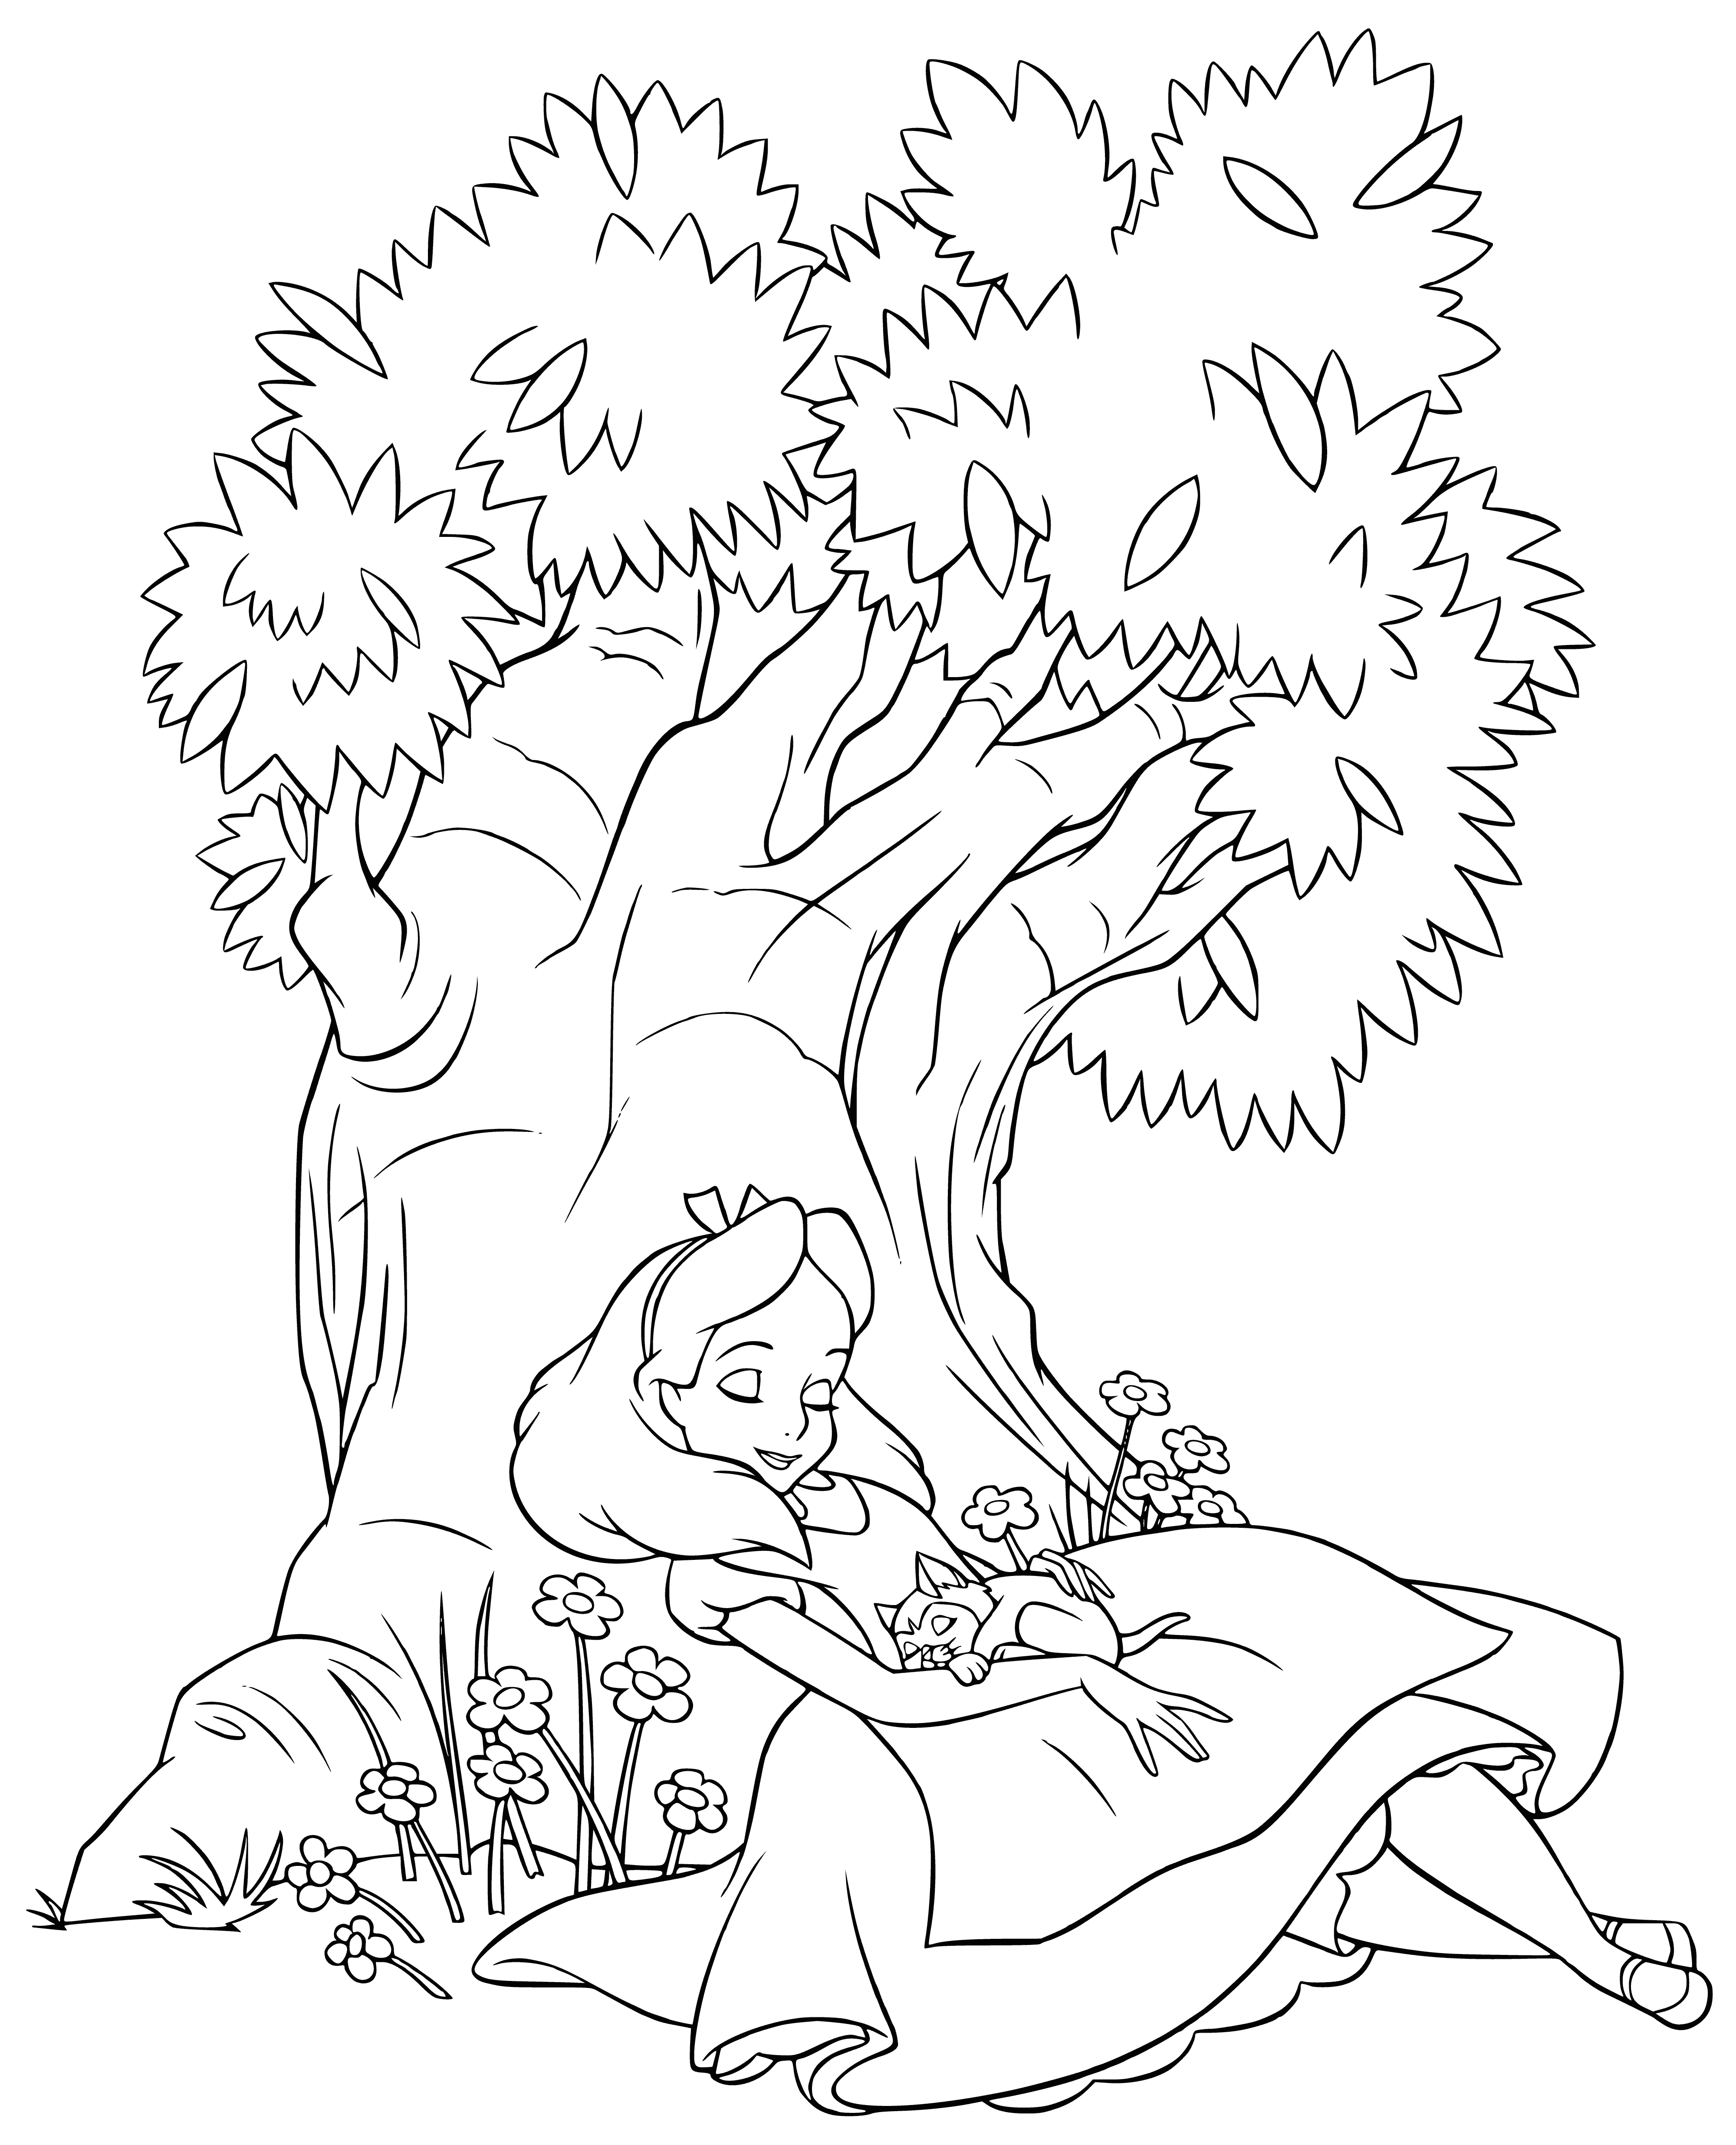 Alice fell asleep under a tree coloring page